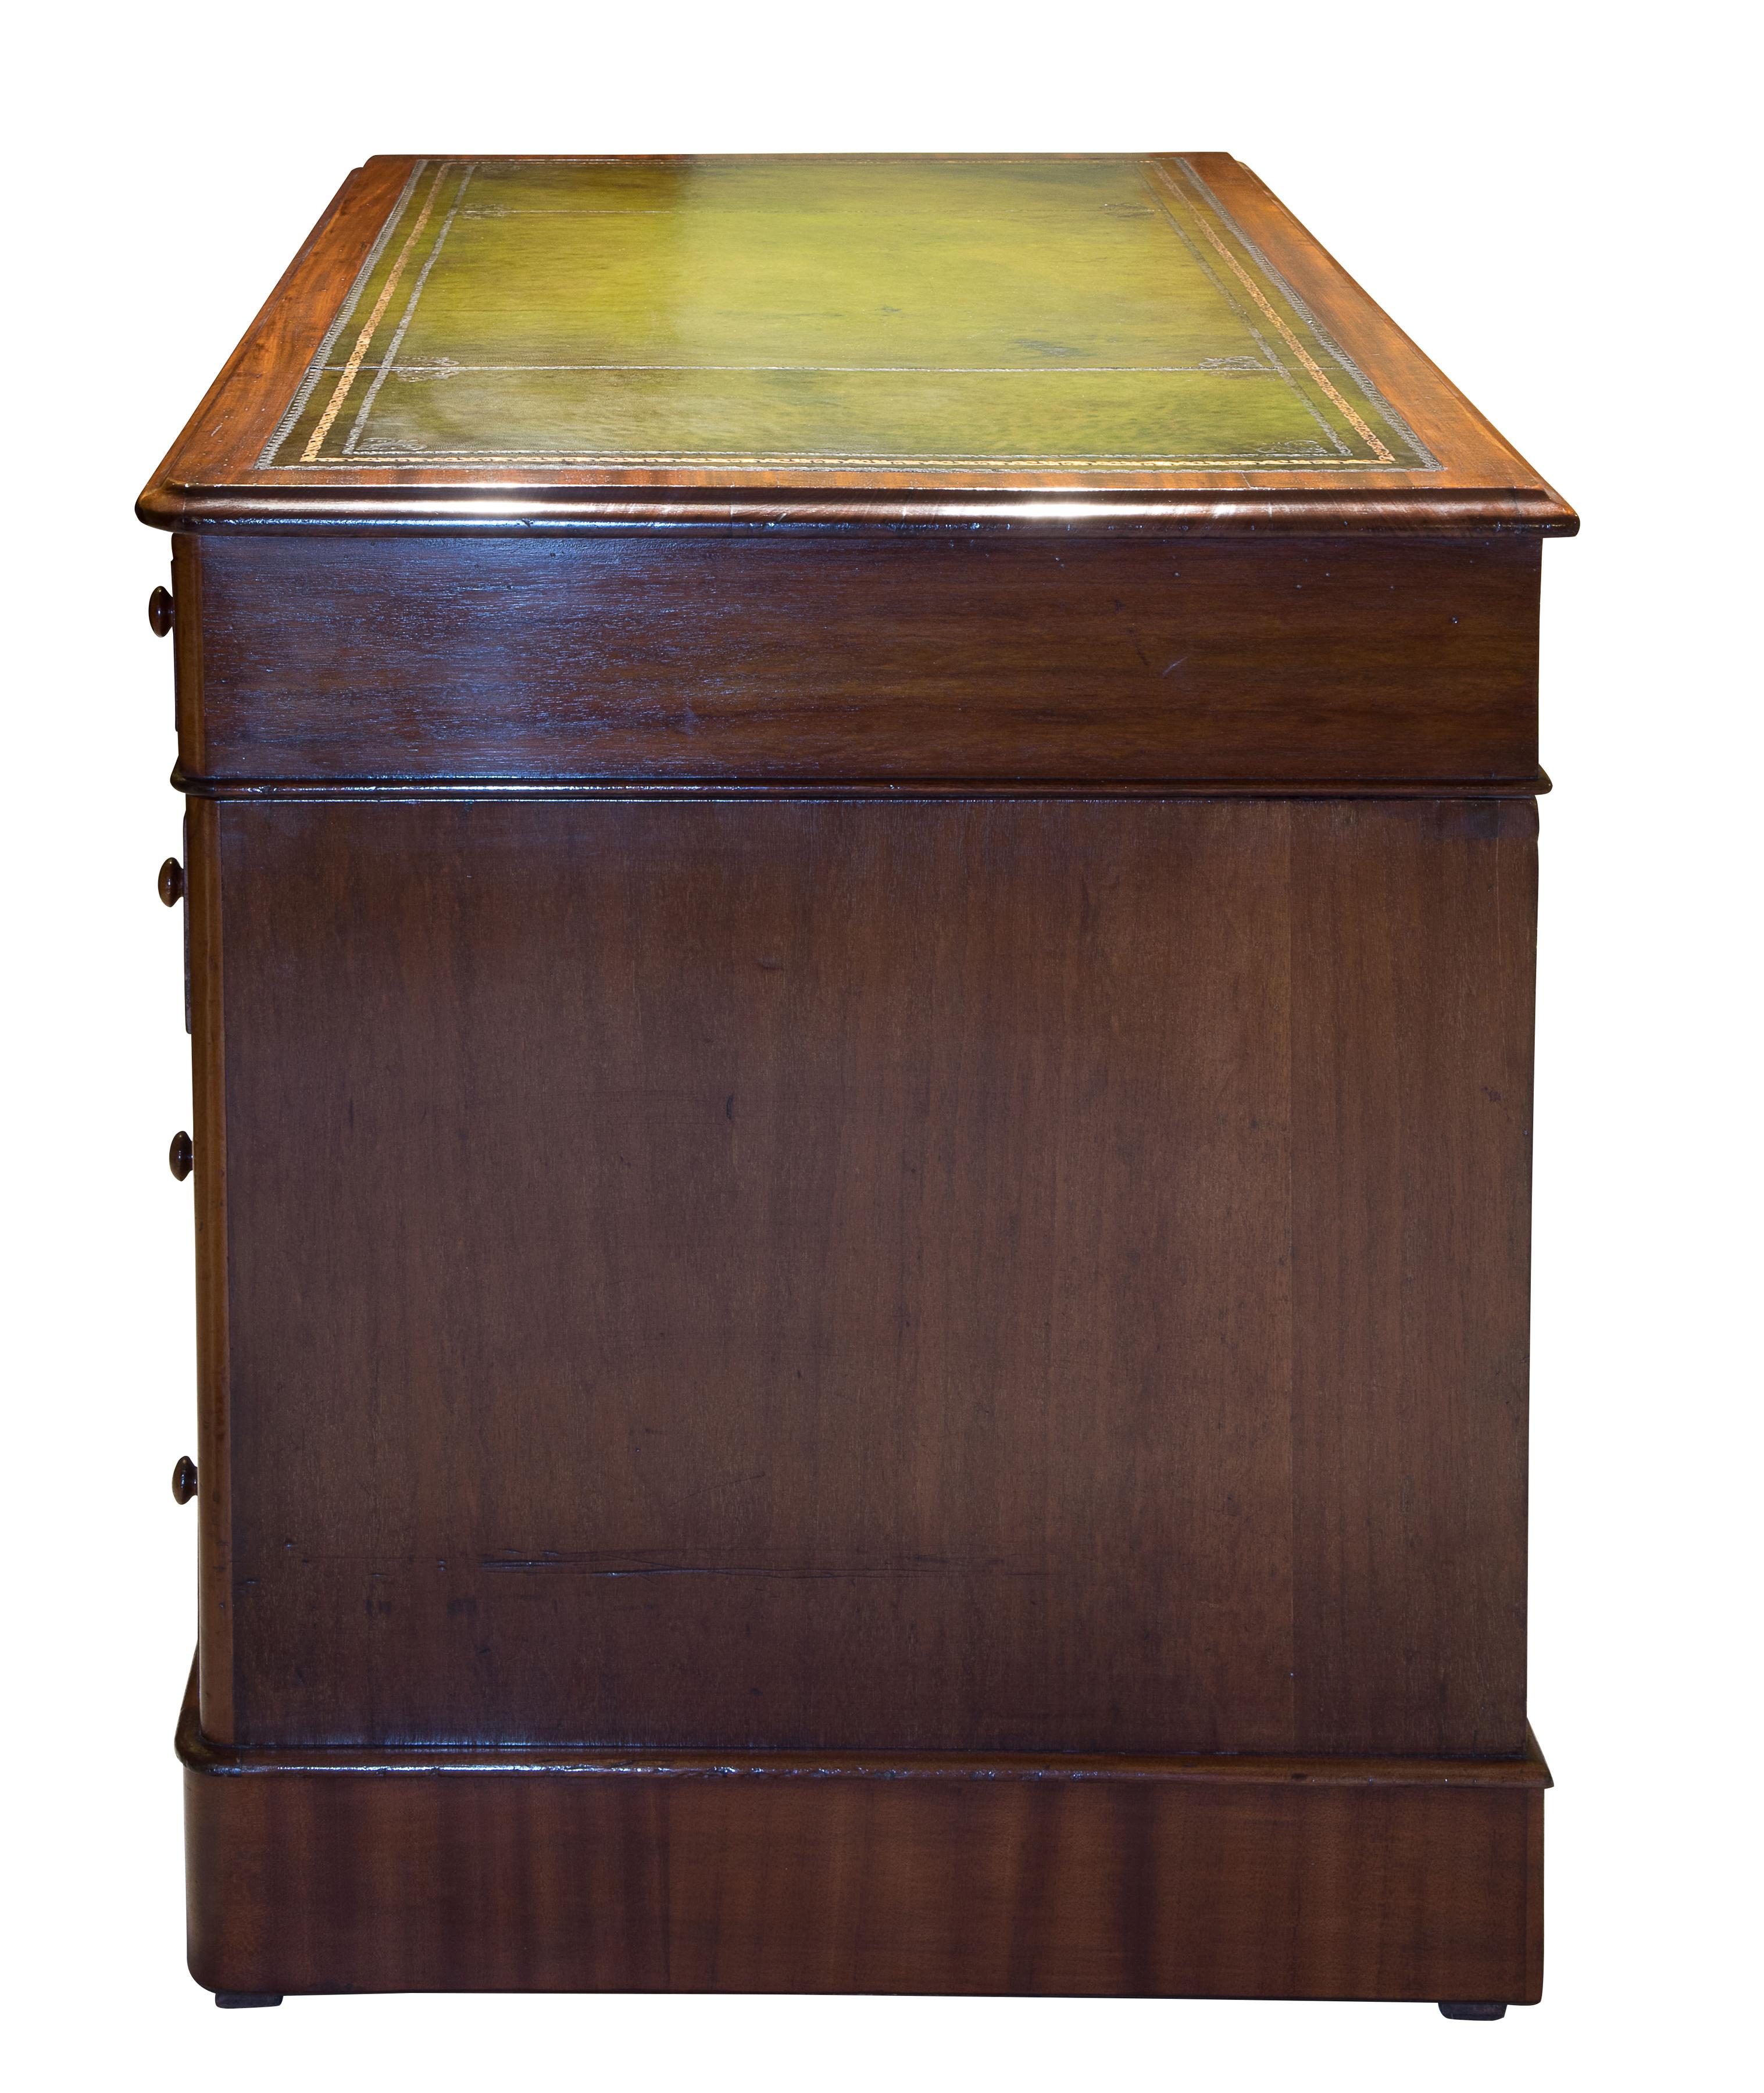 A Victorian mahogany pedestal desk of 9 drawers. Rounded corners and green leather inset top,

circa 1880.